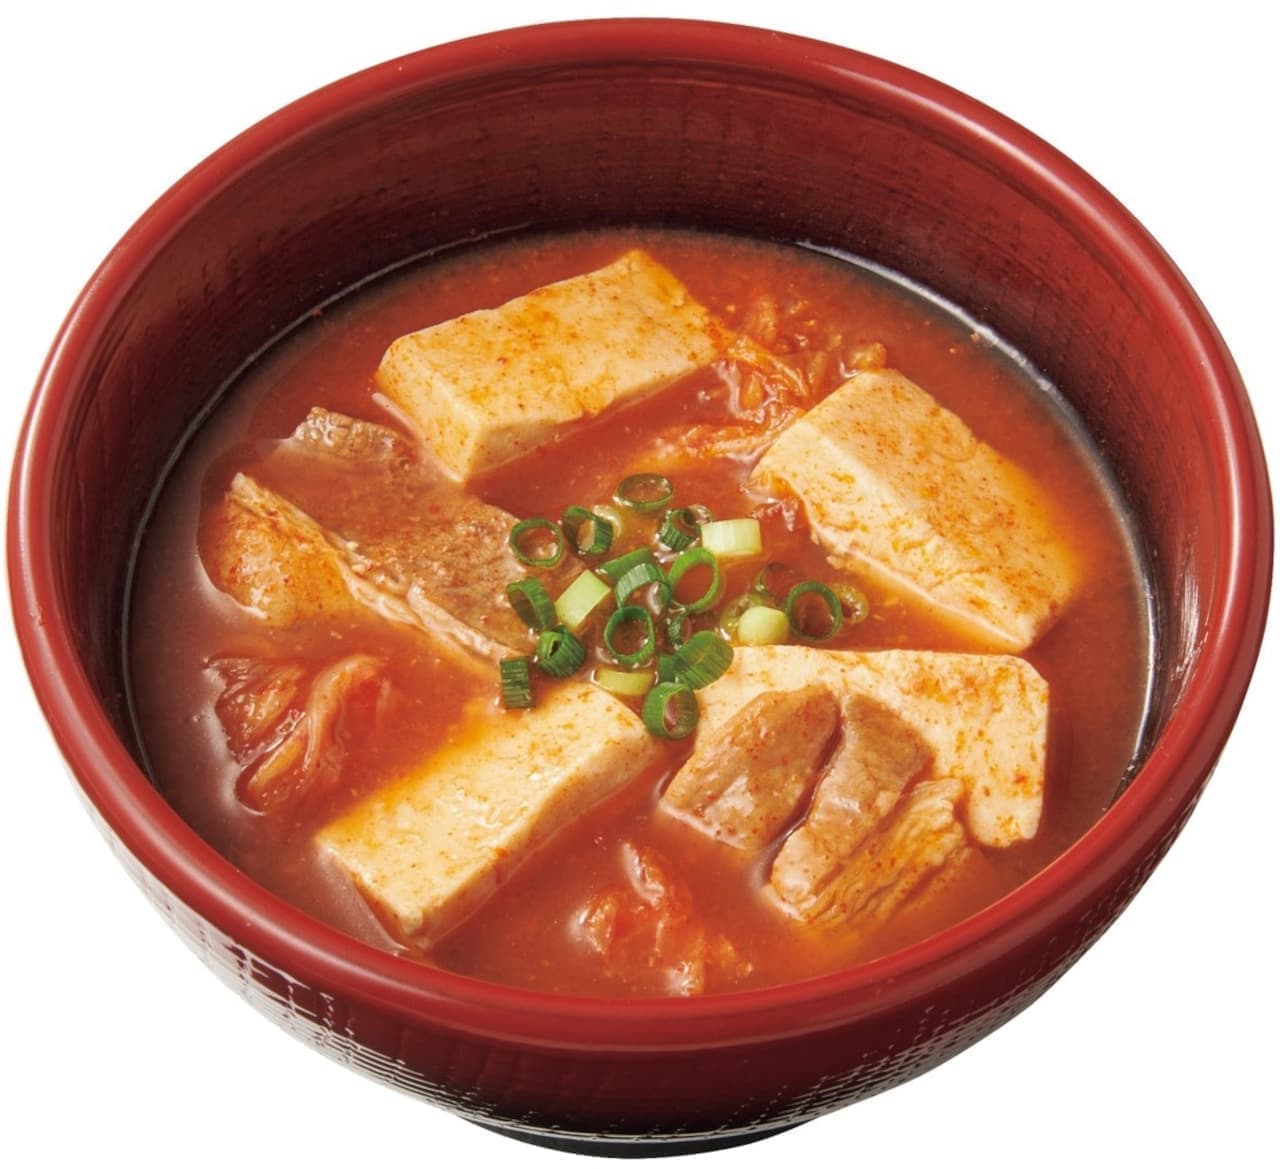 Yayoiken "Delicious Spicy Chige Soup